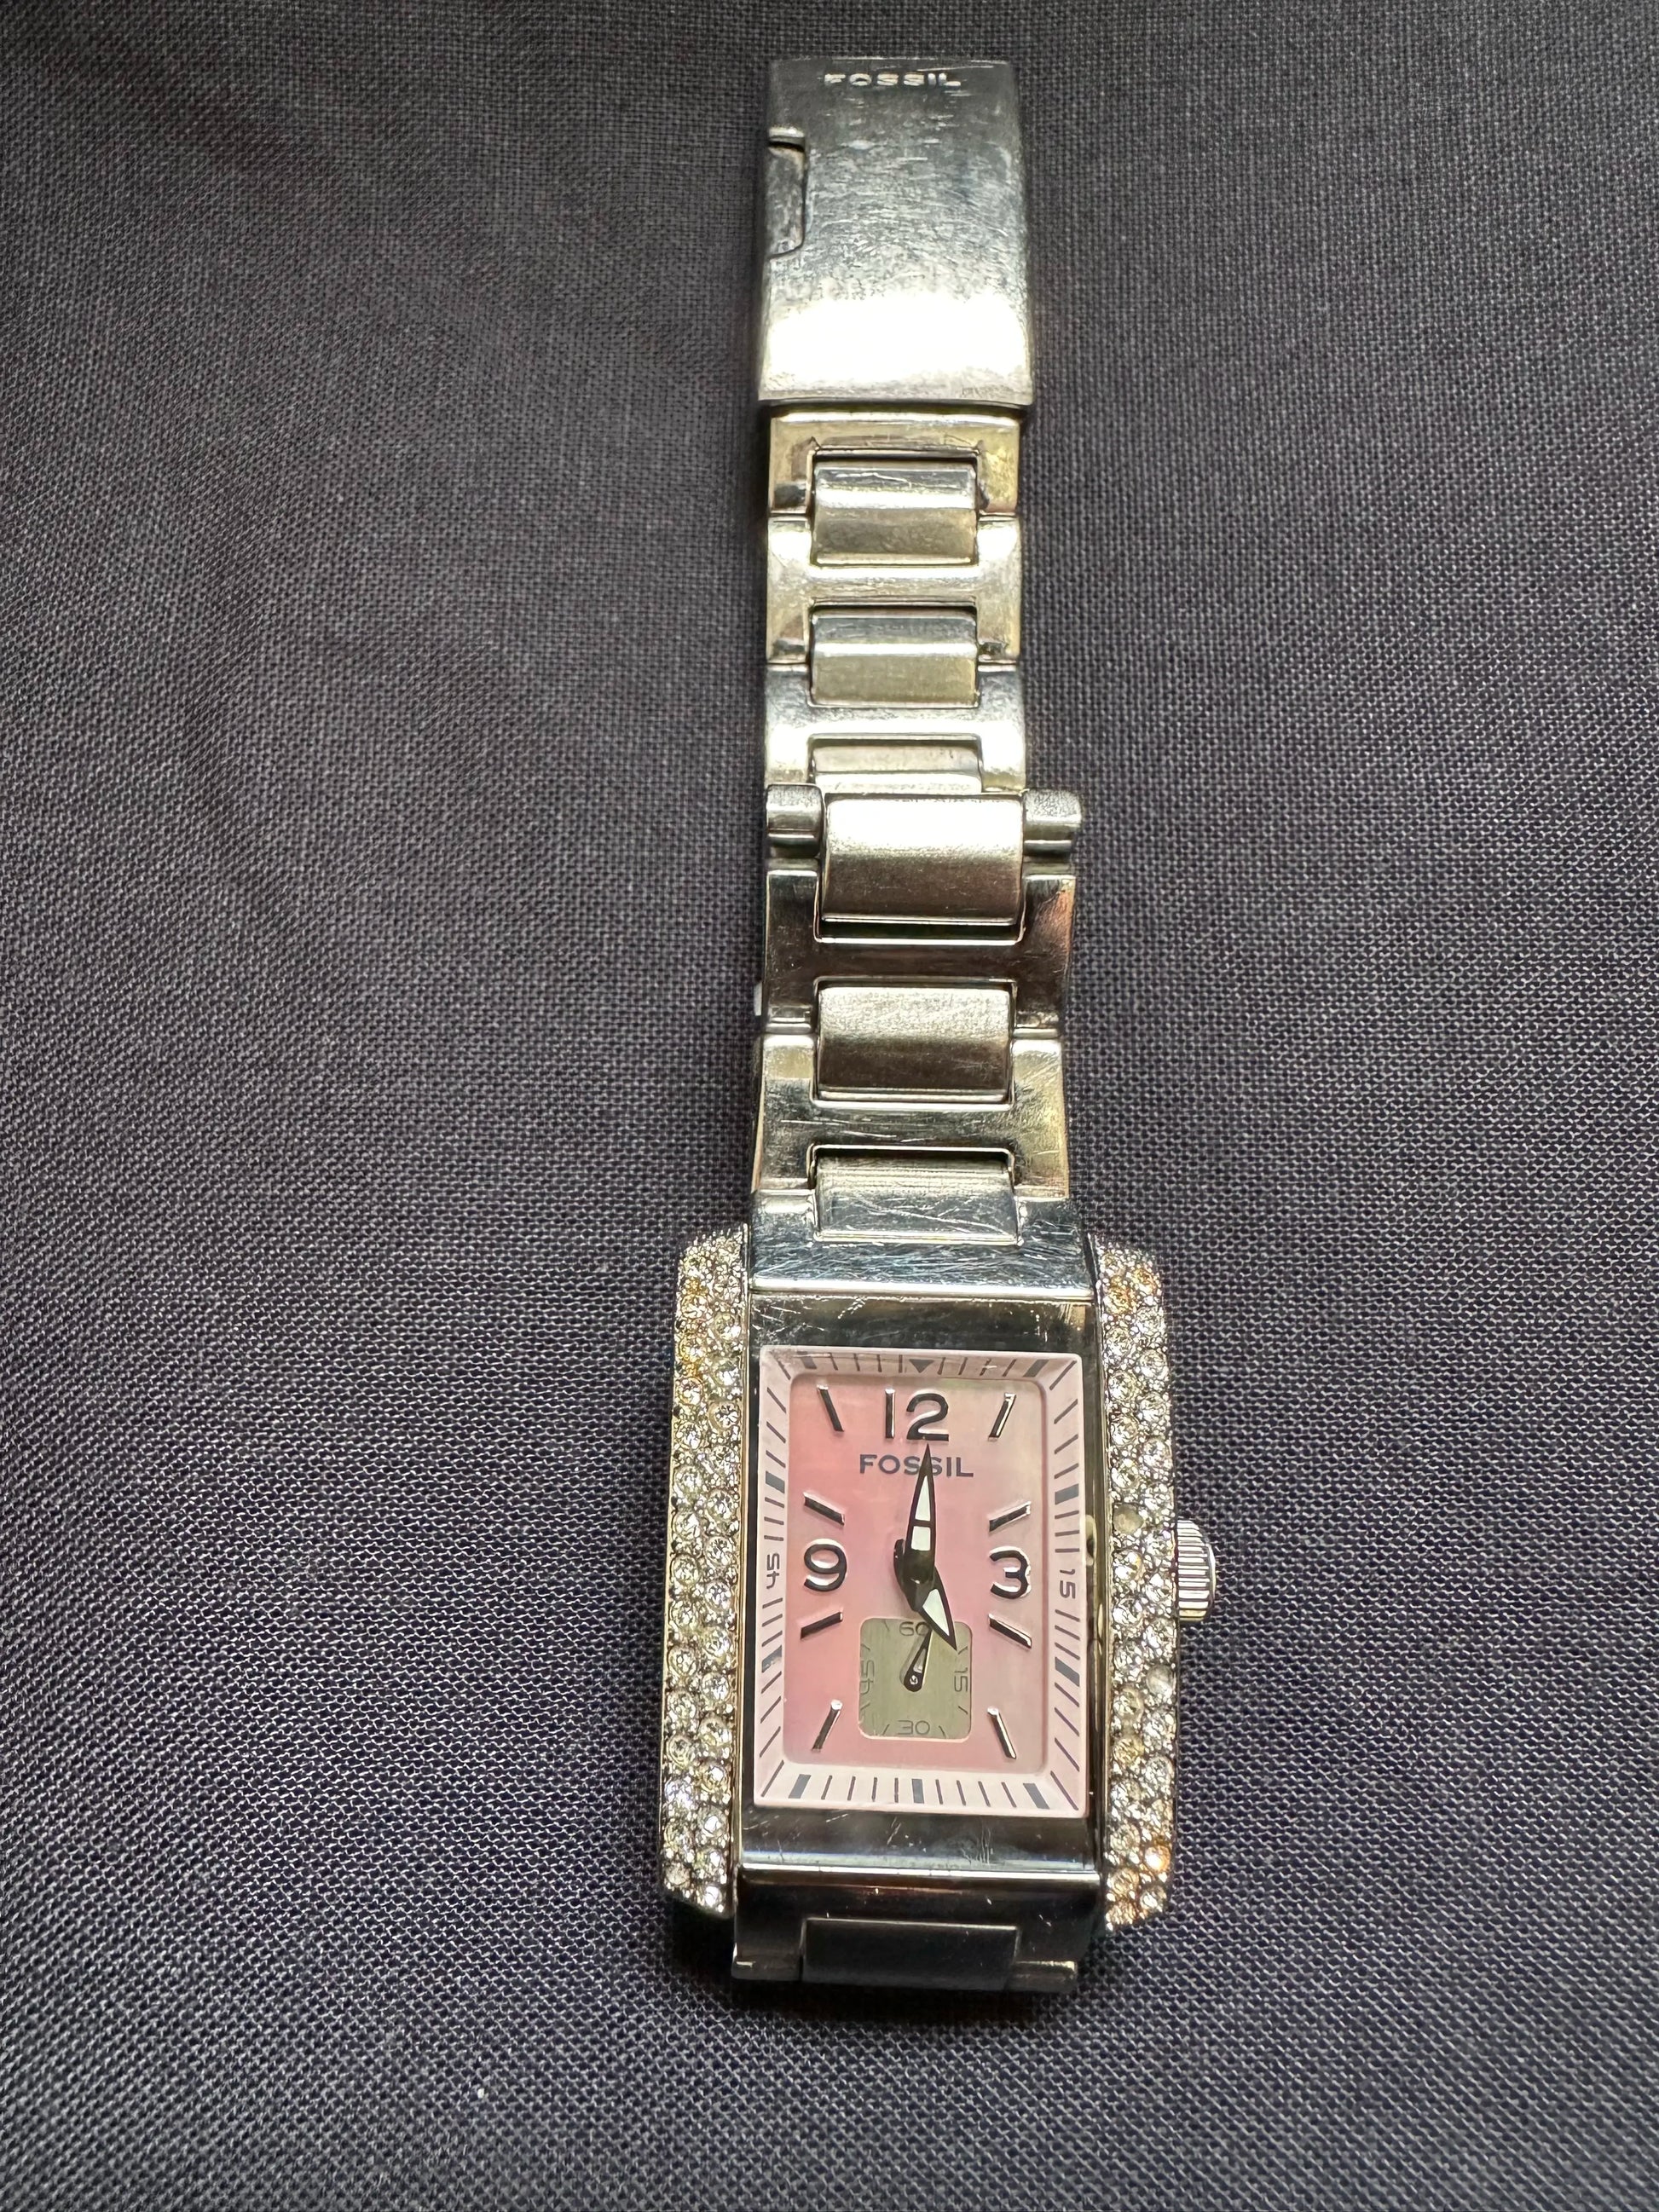 Fossil Watch Silver Band Pink Face